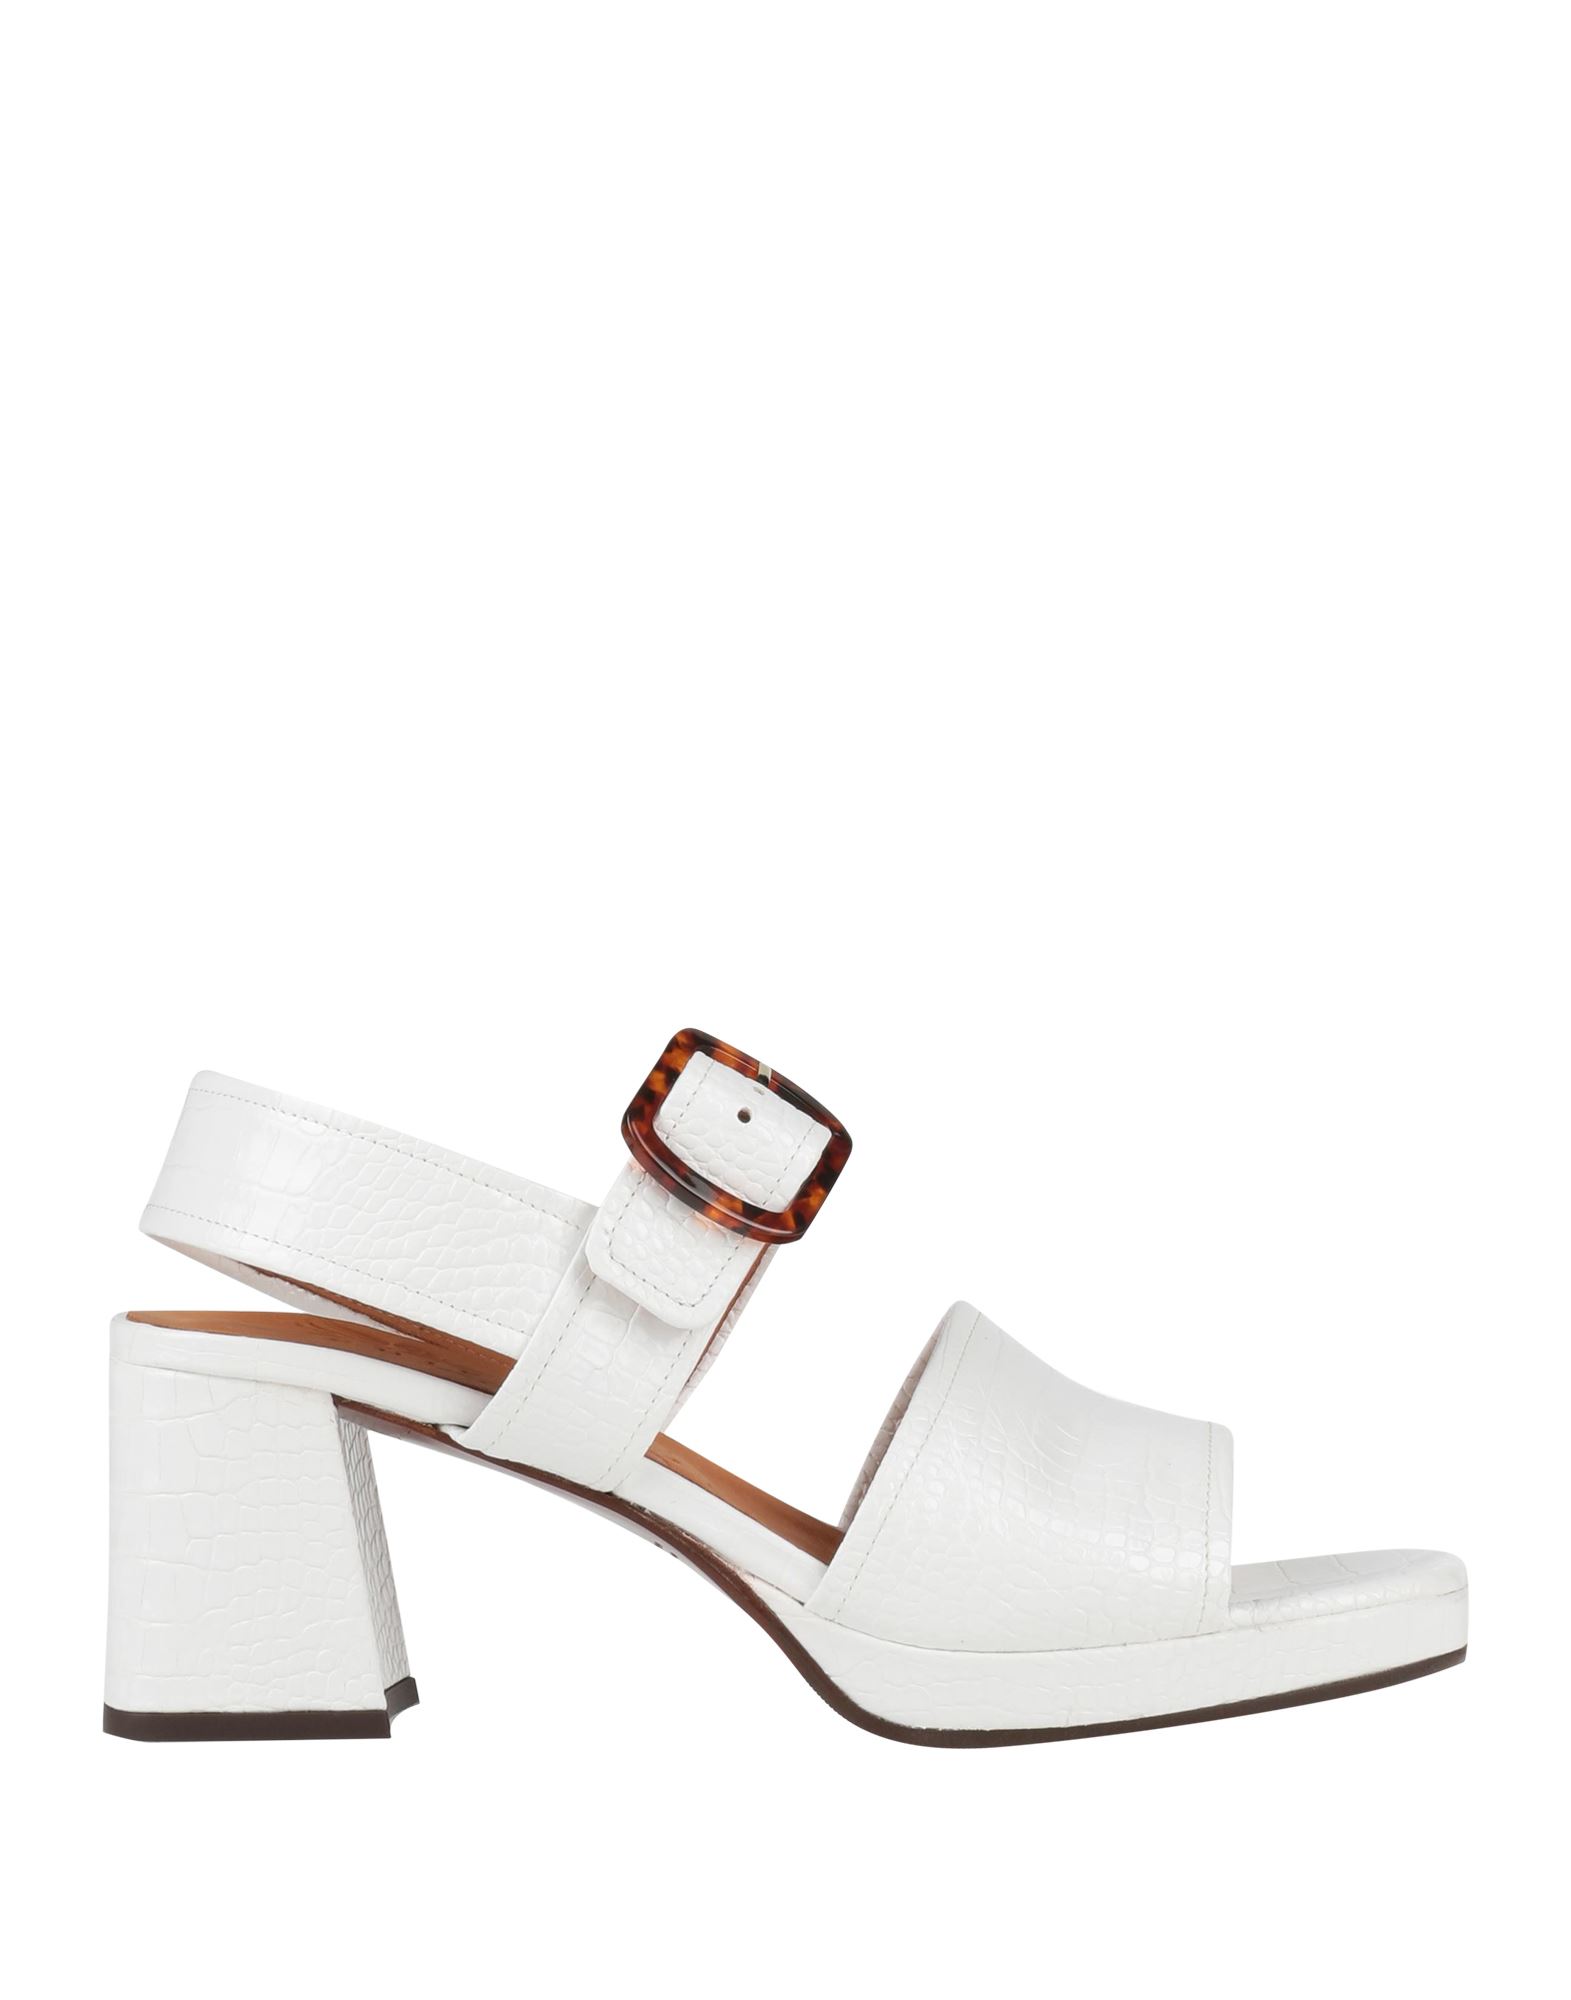 CHIE MIHARA CHIE MIHARA WOMAN SANDALS WHITE SIZE 11 SOFT LEATHER